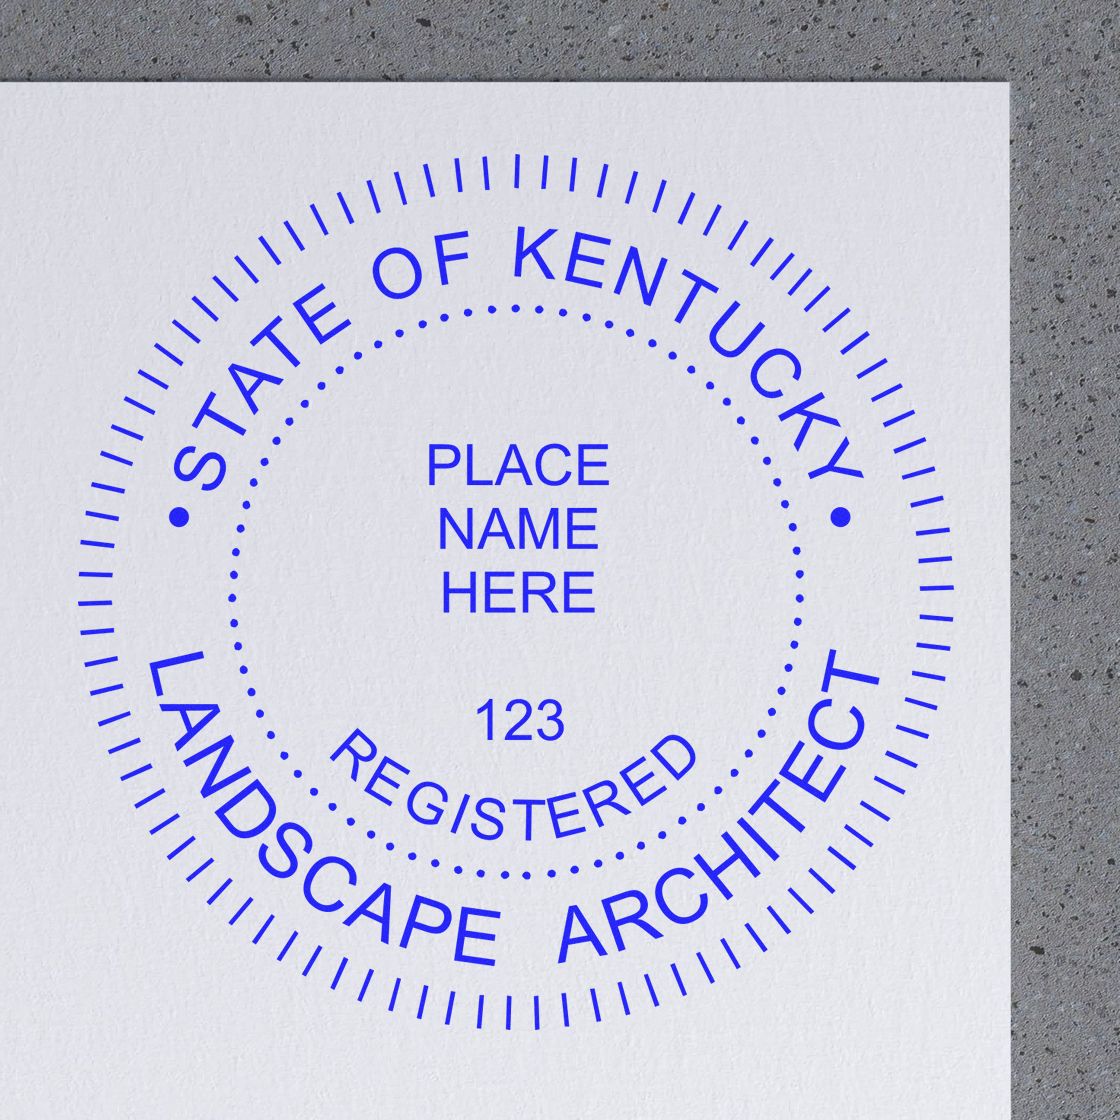 This paper is stamped with a sample imprint of the Self-Inking Kentucky Landscape Architect Stamp, signifying its quality and reliability.